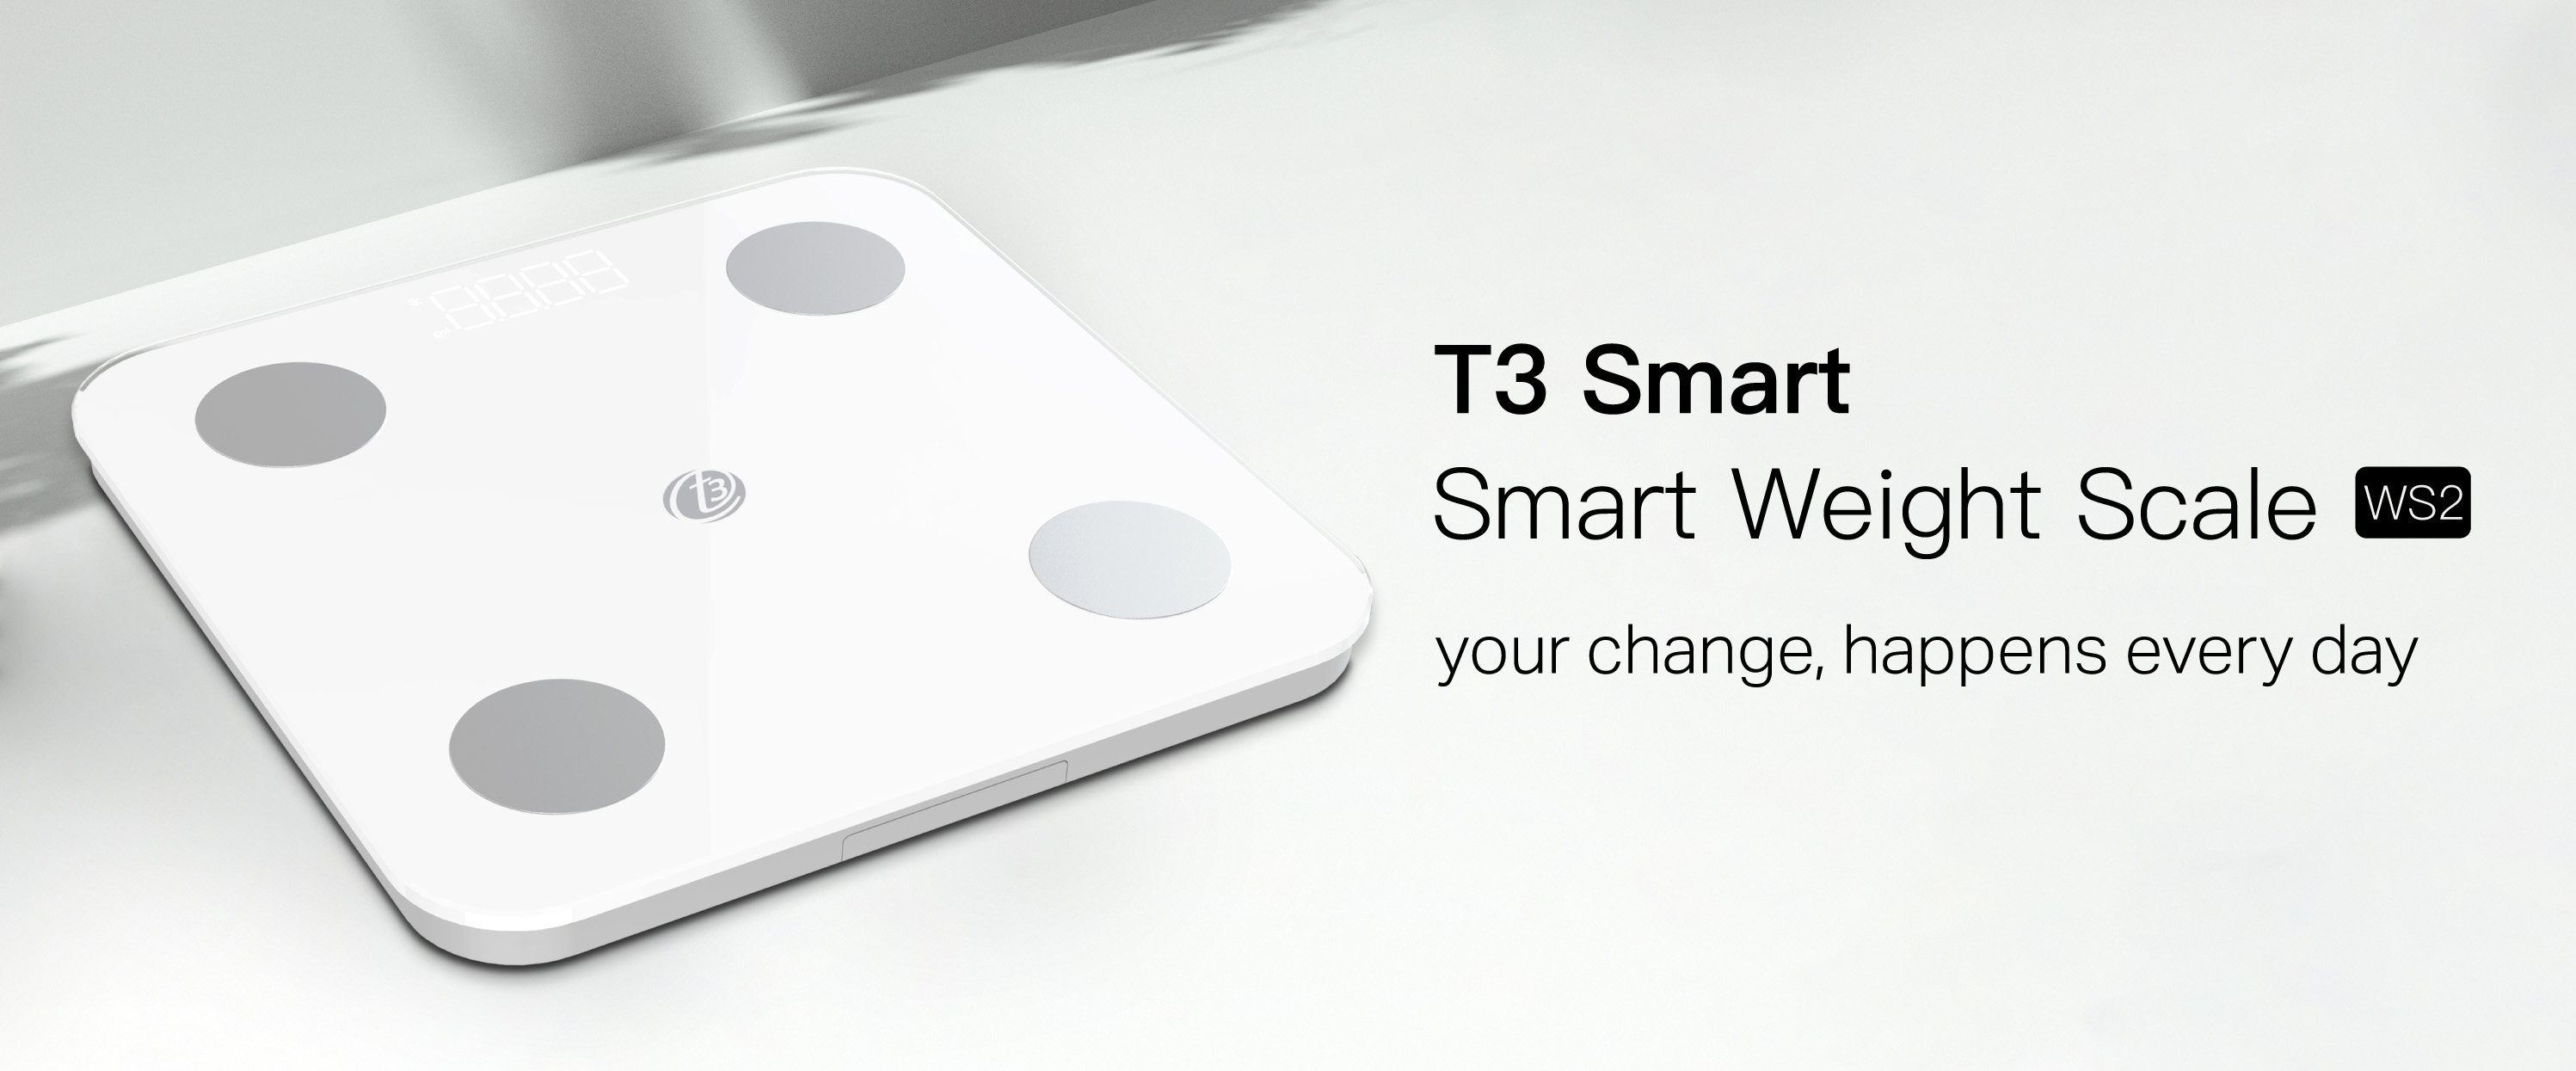 T3 Smart Weight Scale WS2